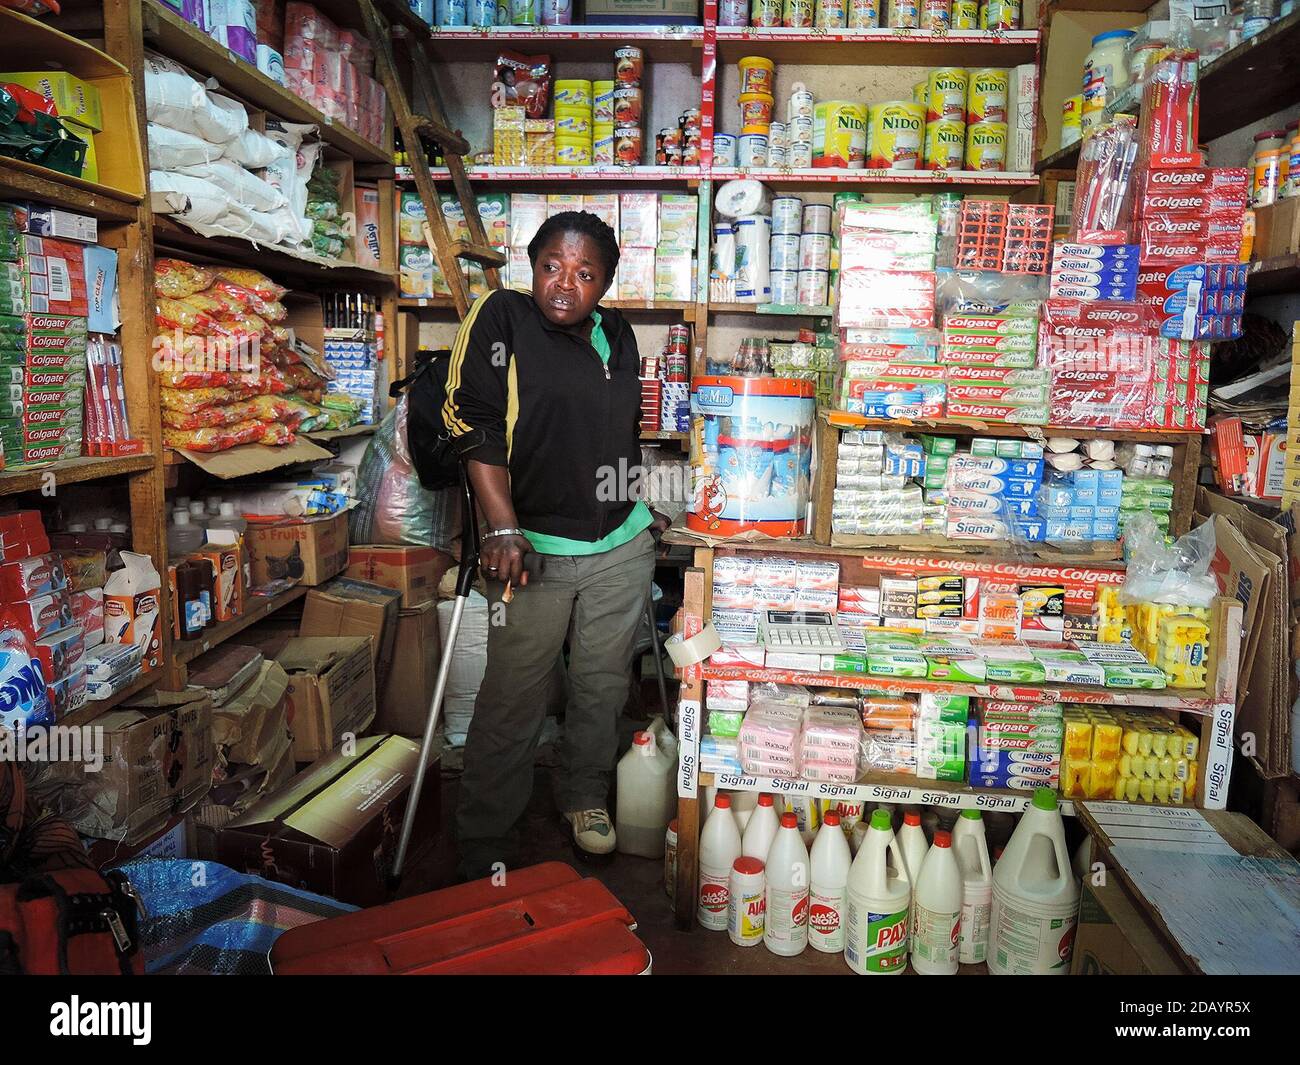 A woman uses a cane to walk around a market shop in Cameroon. Stock Photo